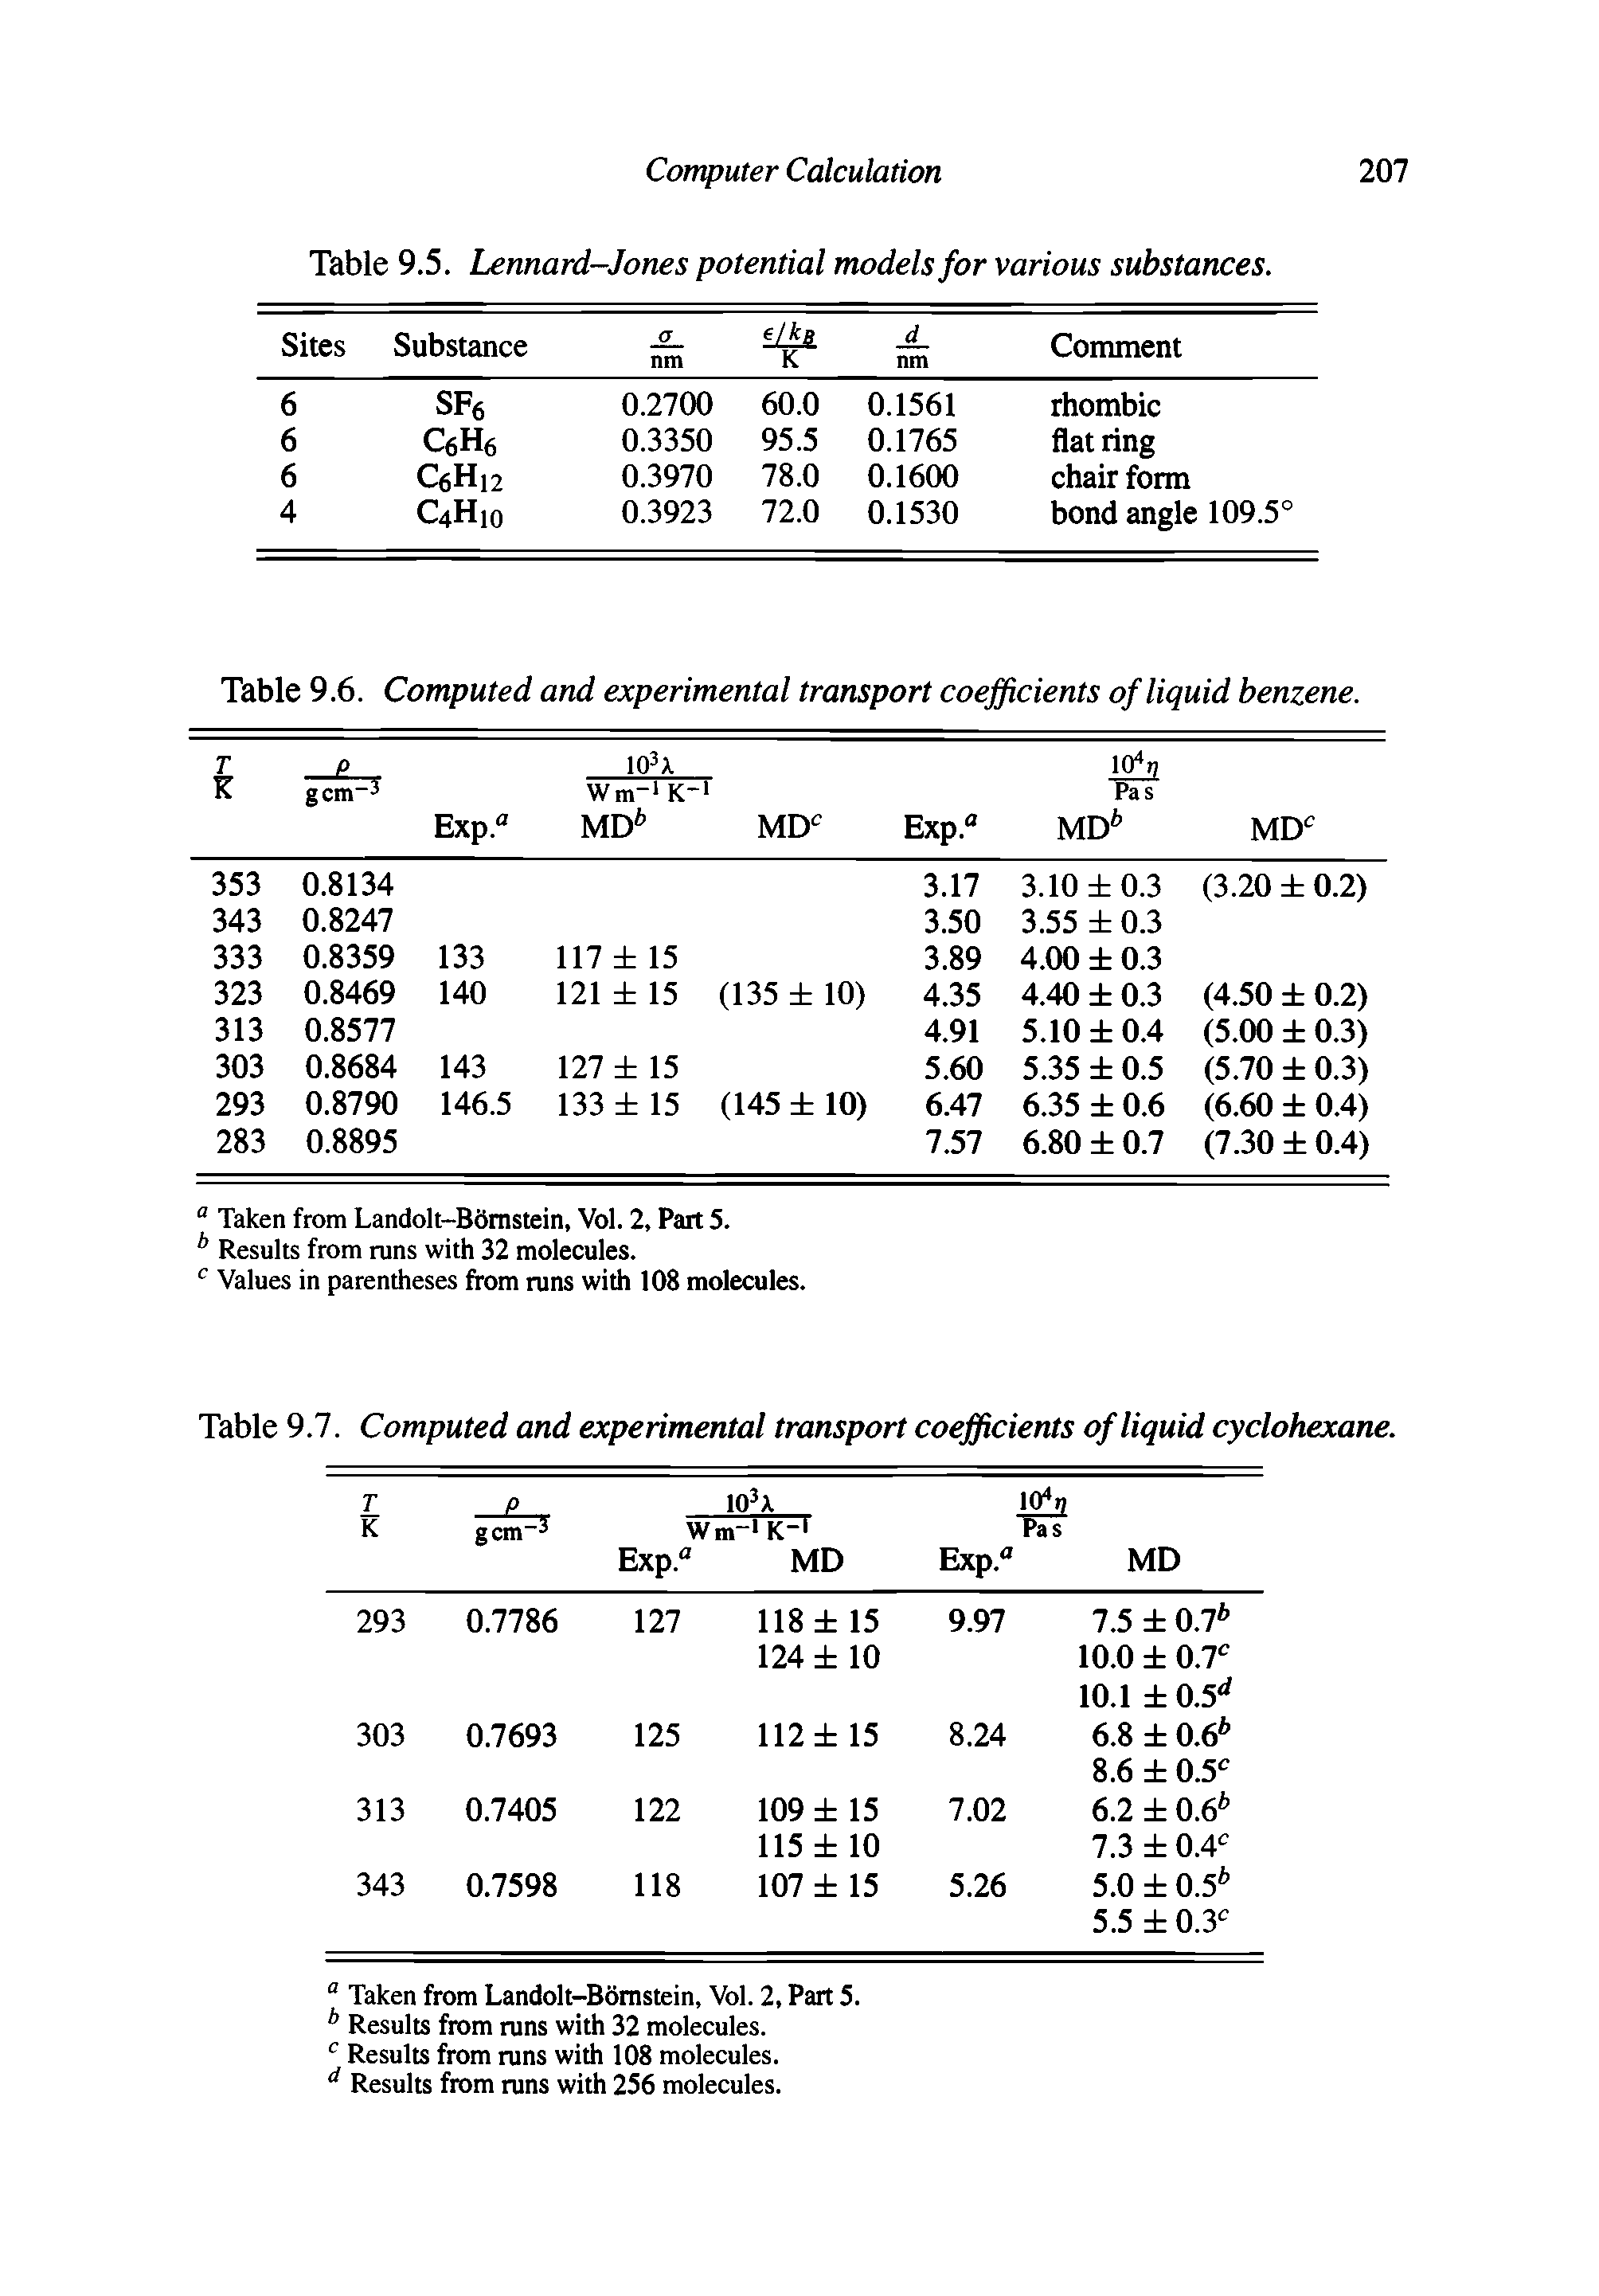 Table 9.6. Computed and experimental transport coefficients of liquid benzene.